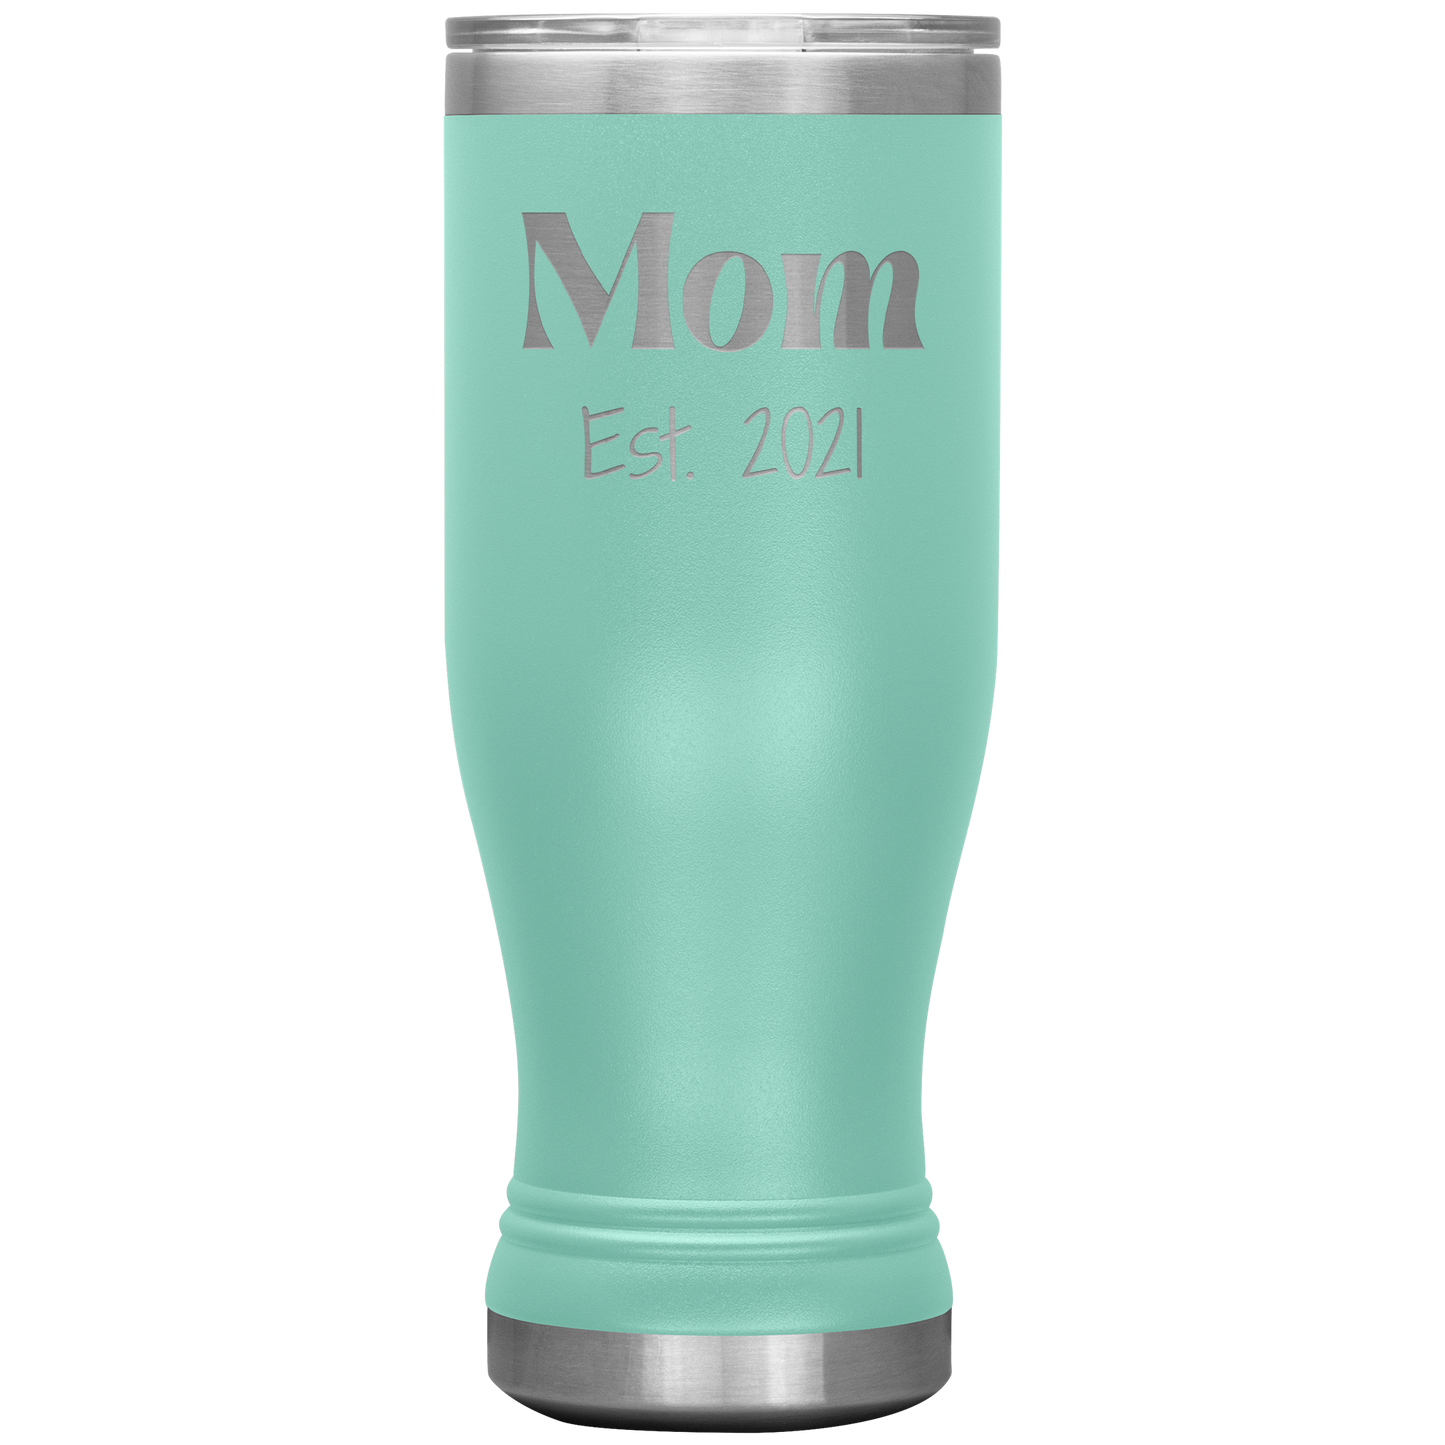 "Mom Est. 2021" Insulated Stainless Steel Boho Tumbler with Lid